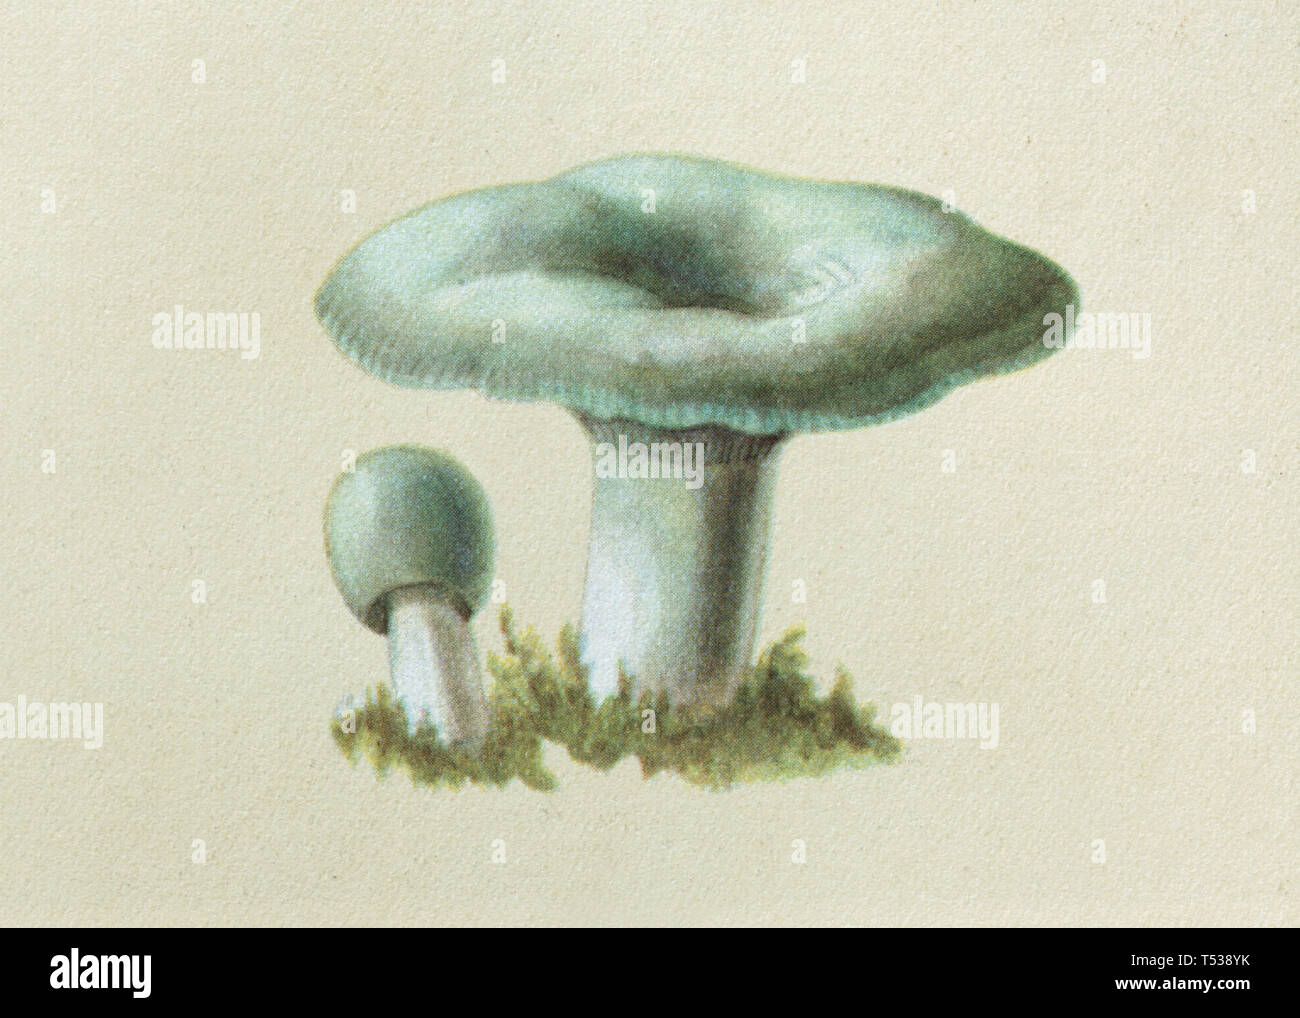 Downy milk cap mushroom (Lactarius pubescens) depicted in the colour illustration in the Book of Tasty and Healthy Food published in the Soviet Union (1953). Stock Photo